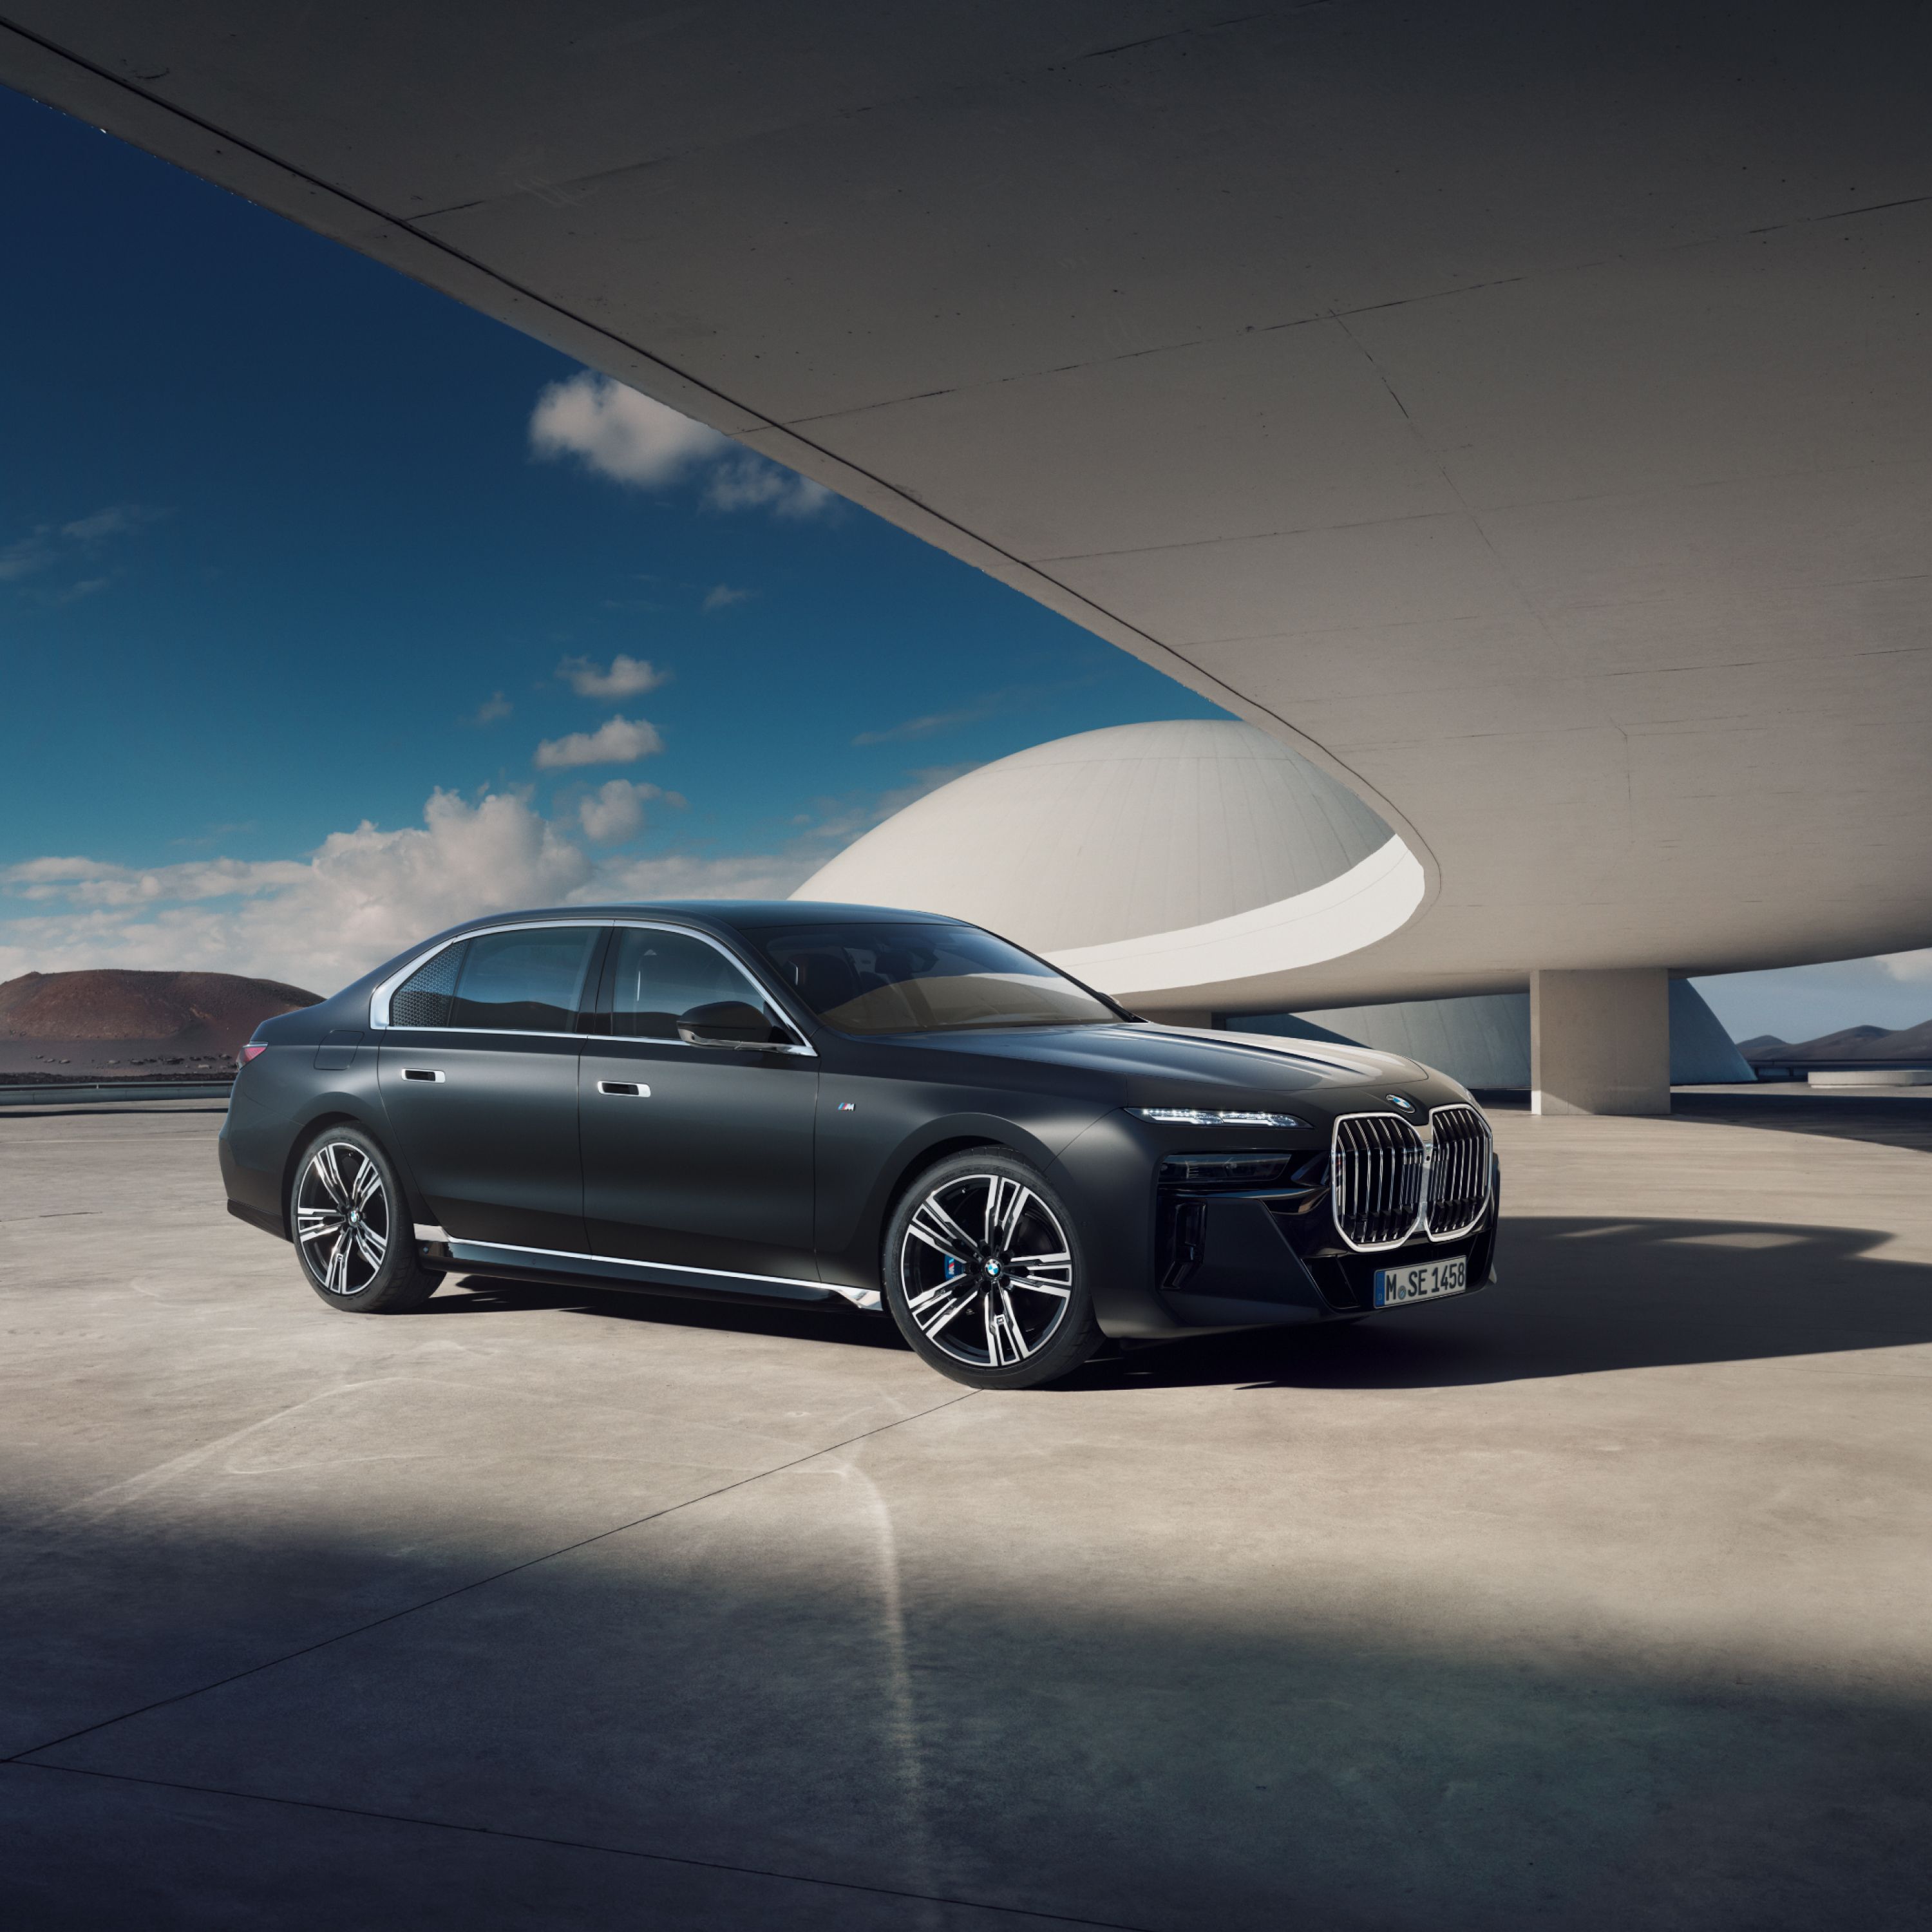 BMW i7 Sedan in Frozen Deep Grey Metallic, parked beneath the roof of a futuristic building